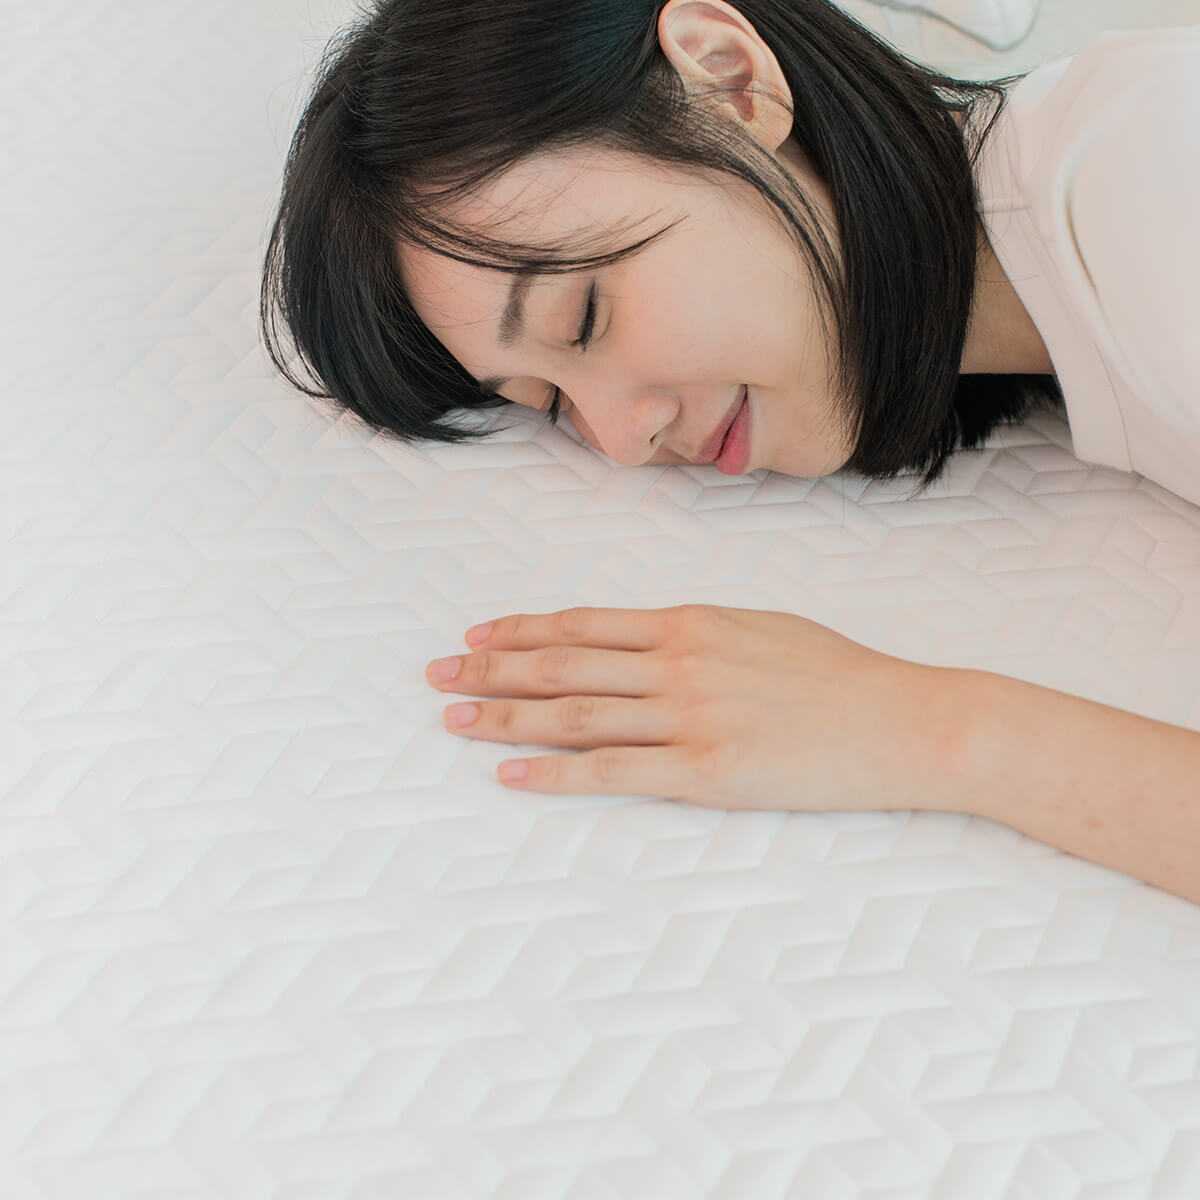 Girl lying face down on an Amazeam mattress, hand feeling the texture of the cover, highlighting the mattress's comfort and cooling.